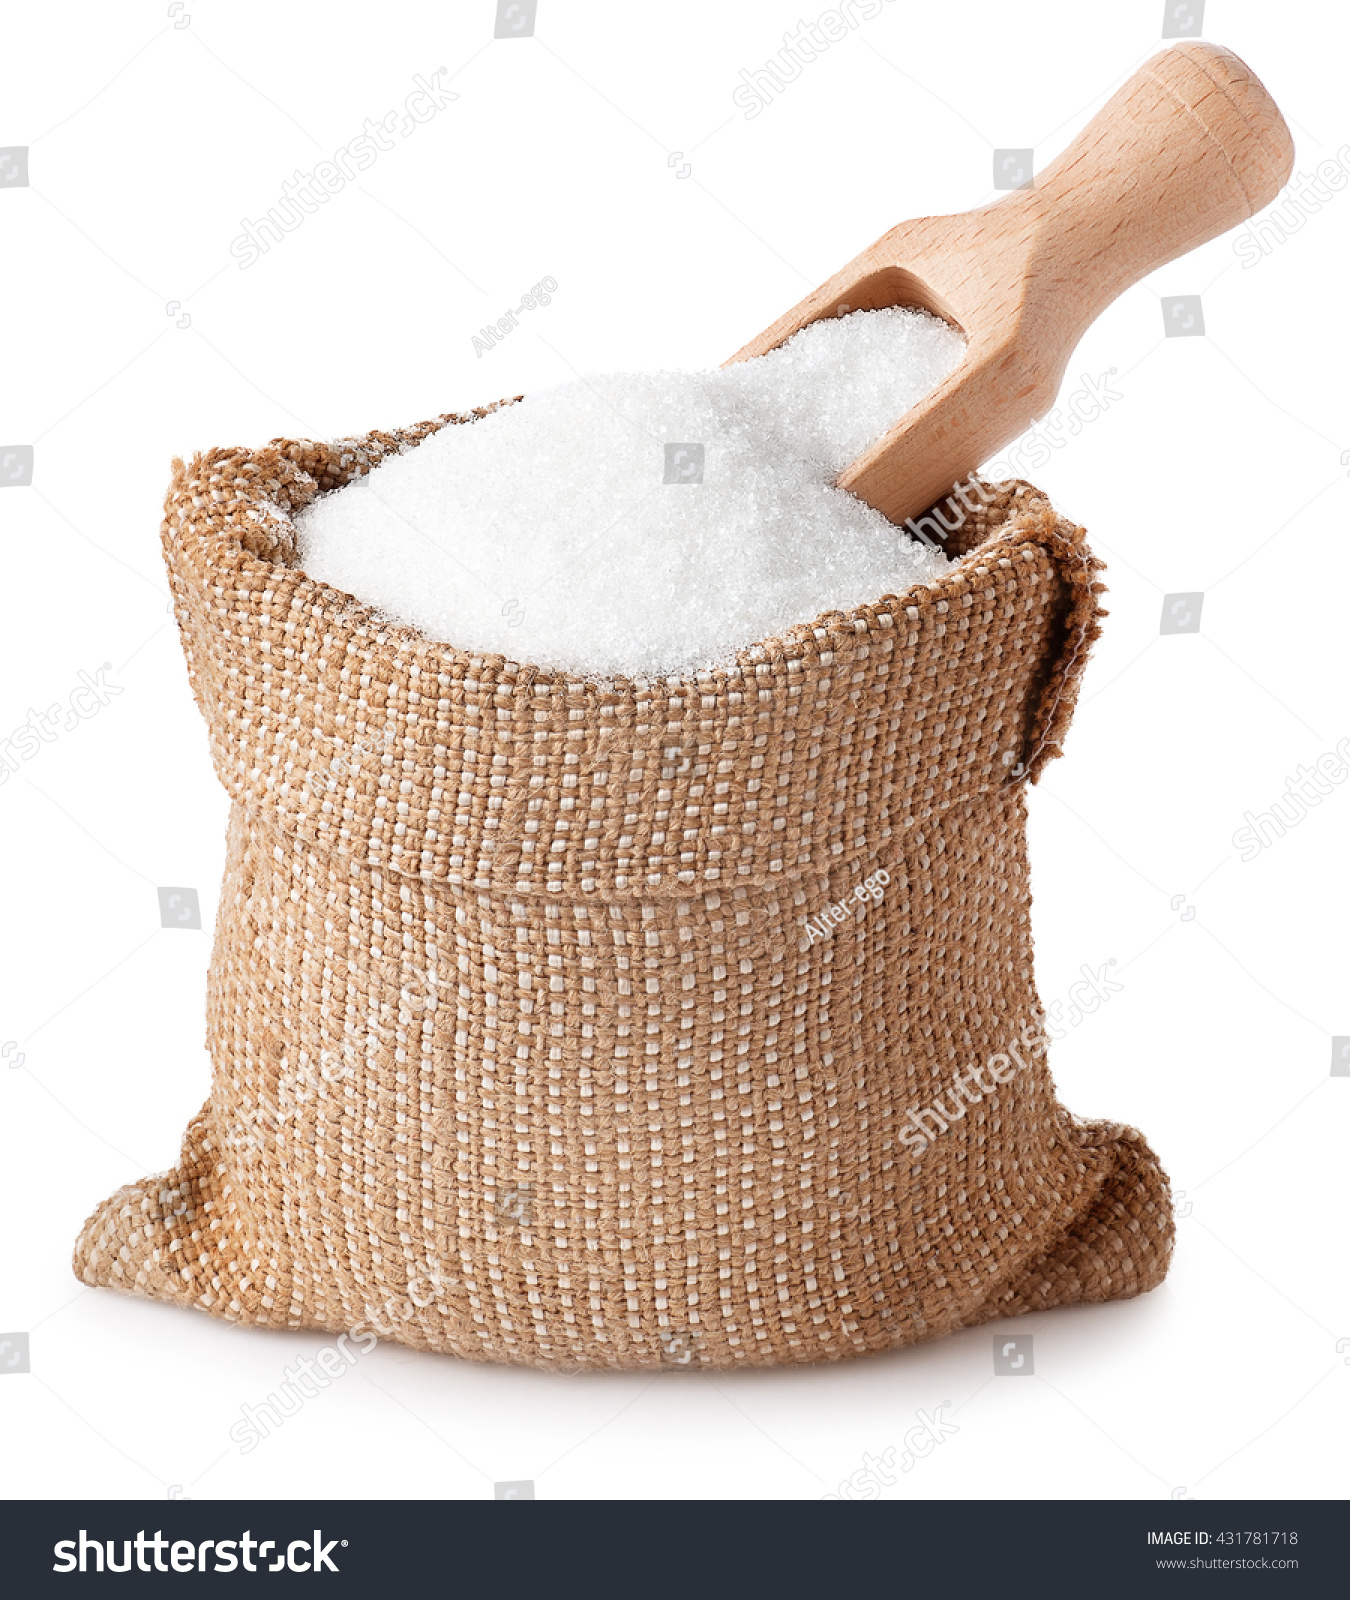 sugar with scoop in burlap sack isolated on white background #431781718